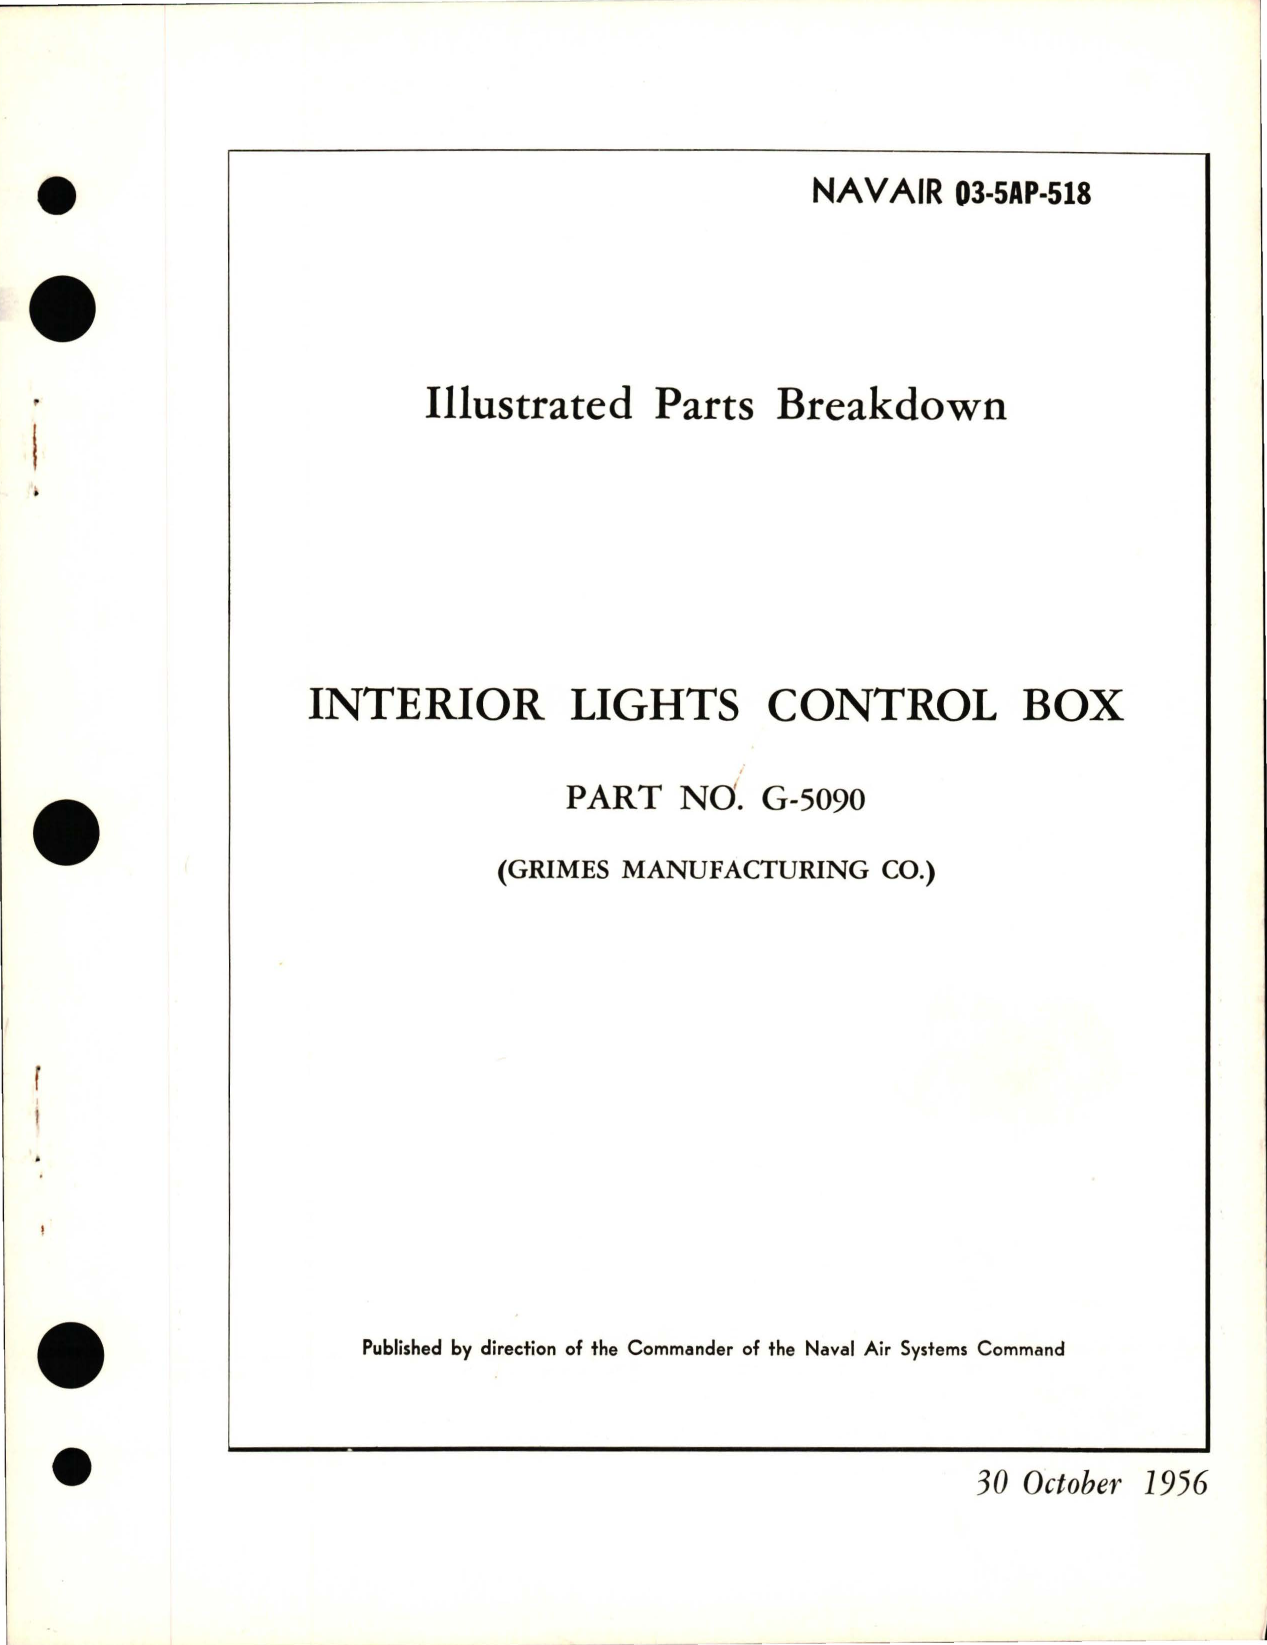 Sample page 1 from AirCorps Library document: Illustrated Parts Breakdown for Interior Lights Control Box - Part G-5090 